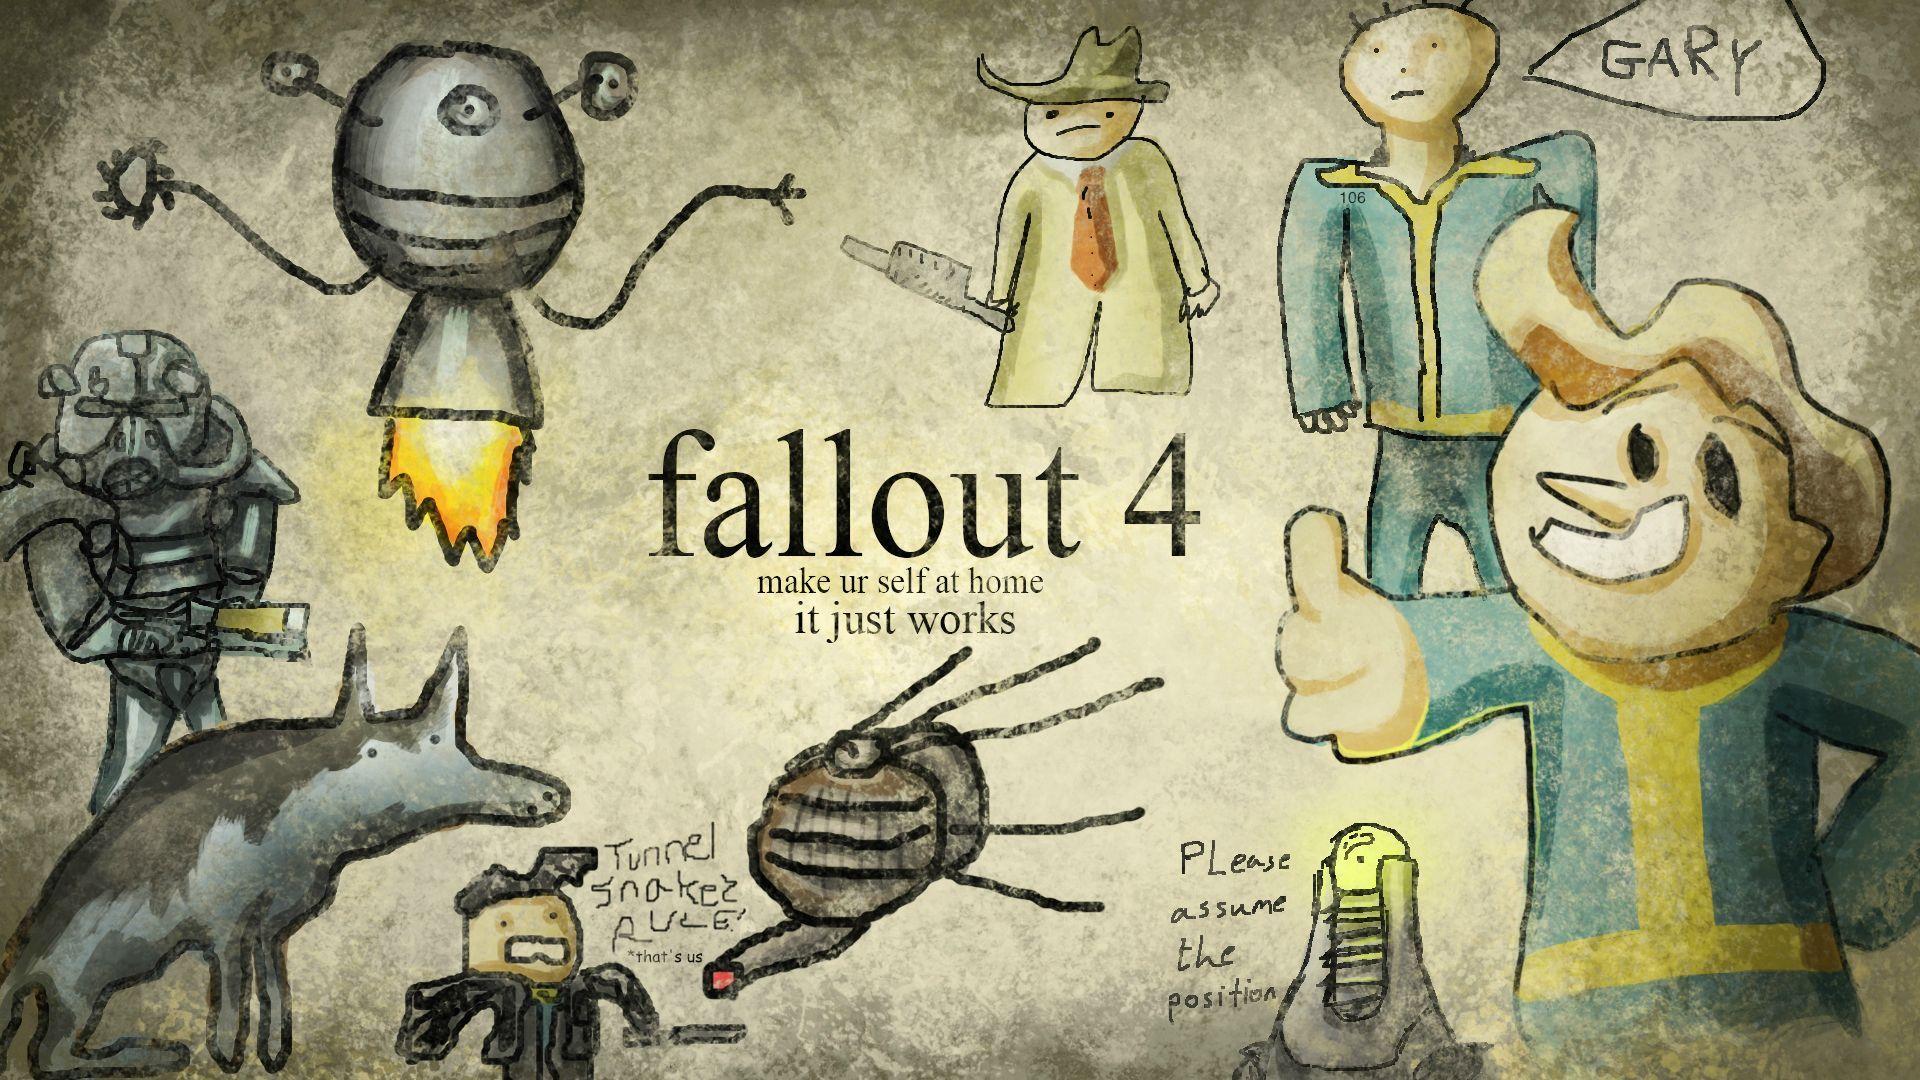 How about a Fallout Wallpaper thread?